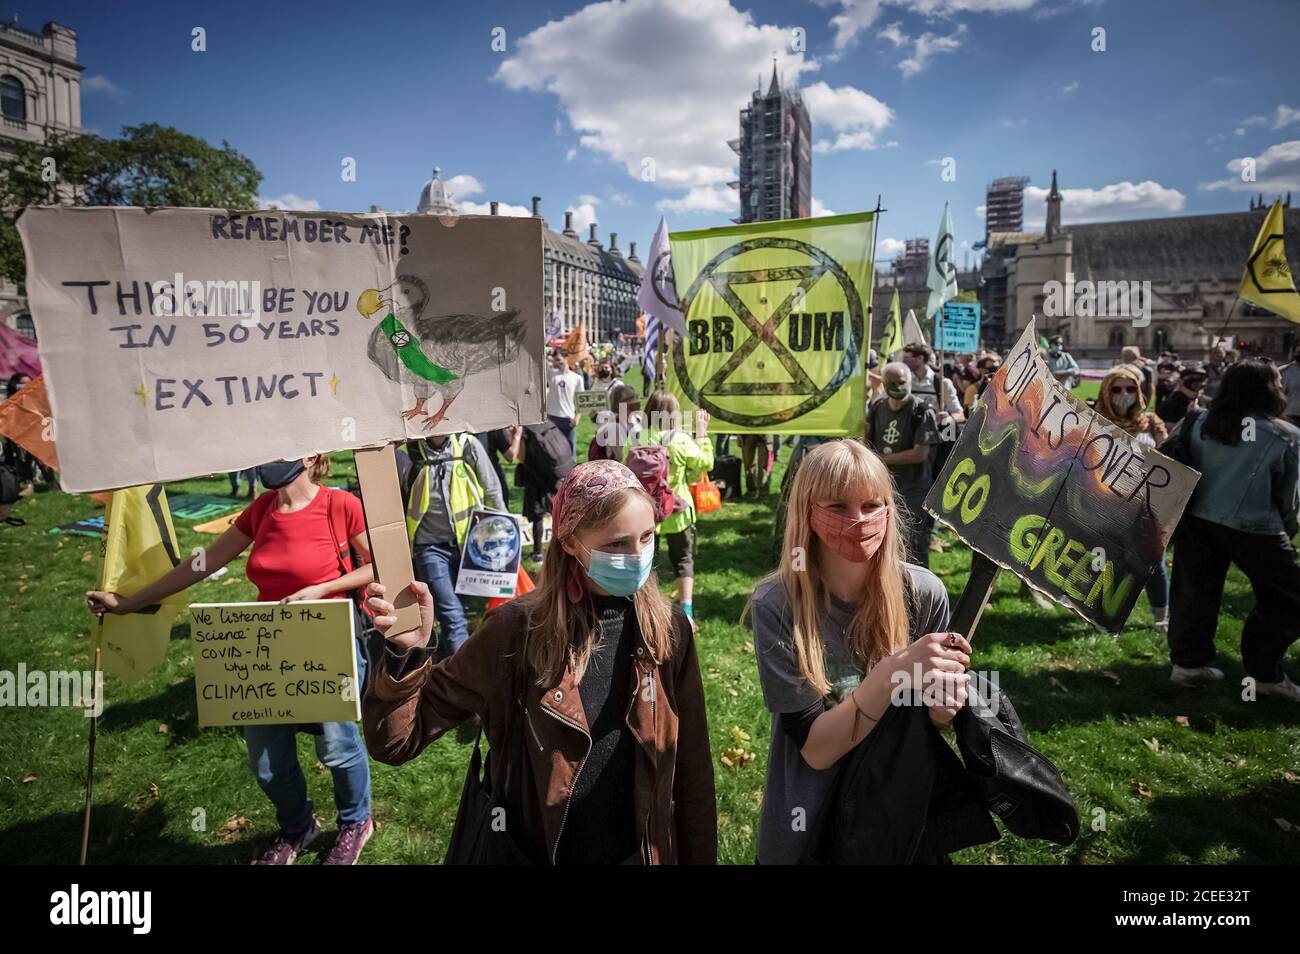 London, UK. 1st September 2020. Extinction Rebellion begin ten days week of climate change action. Marching to Parliament Square, the Extinction Rebellion (XR) activists continue their direct protest action of raising awareness of on-going climate breakdown. Credit: Guy Corbishley/Alamy Live News Stock Photo